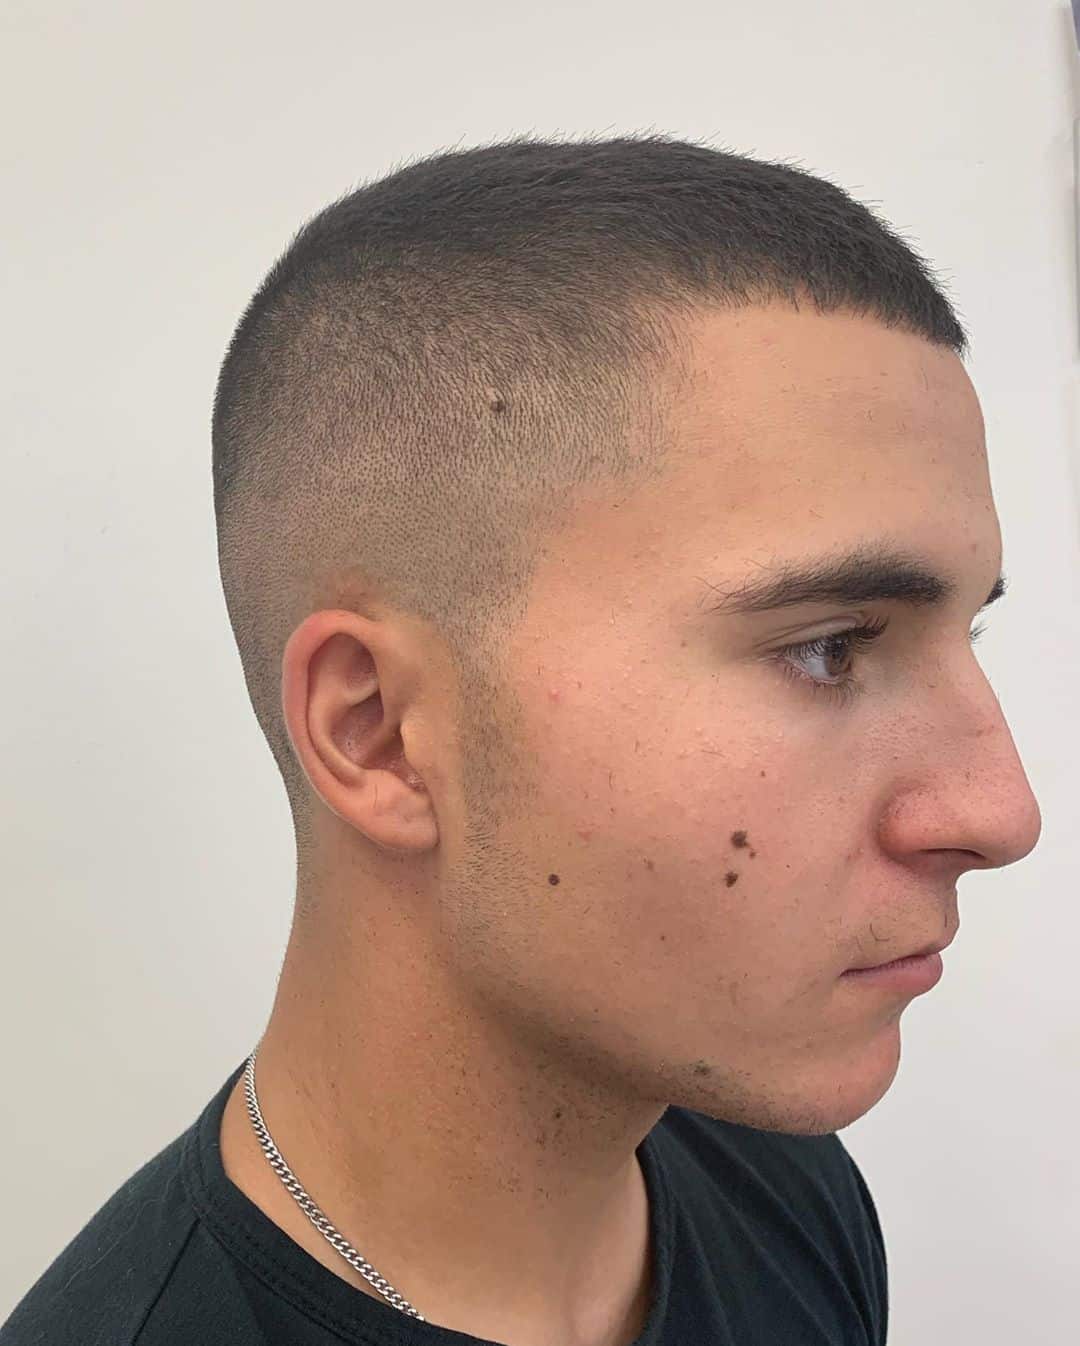 17 Buzz Cut Ideas for Masculine and Stylish Guys in 2021